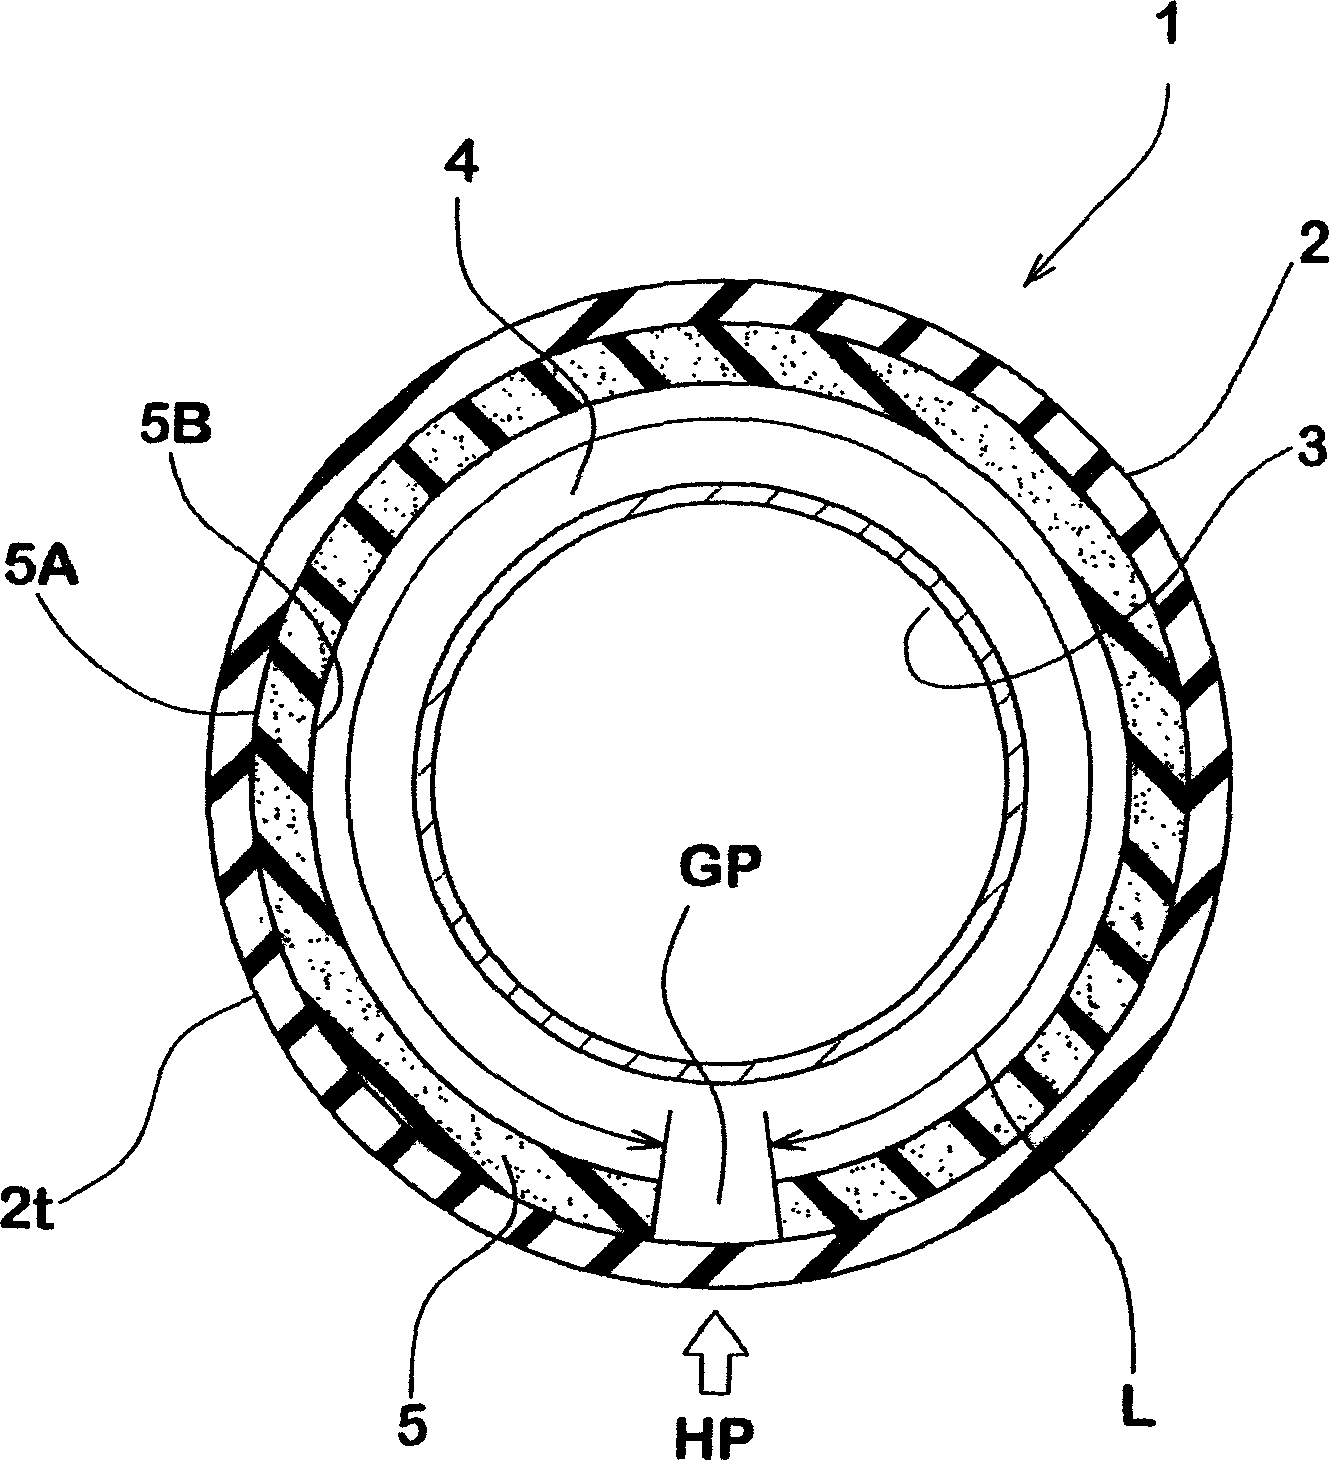 Tire noise reducing system